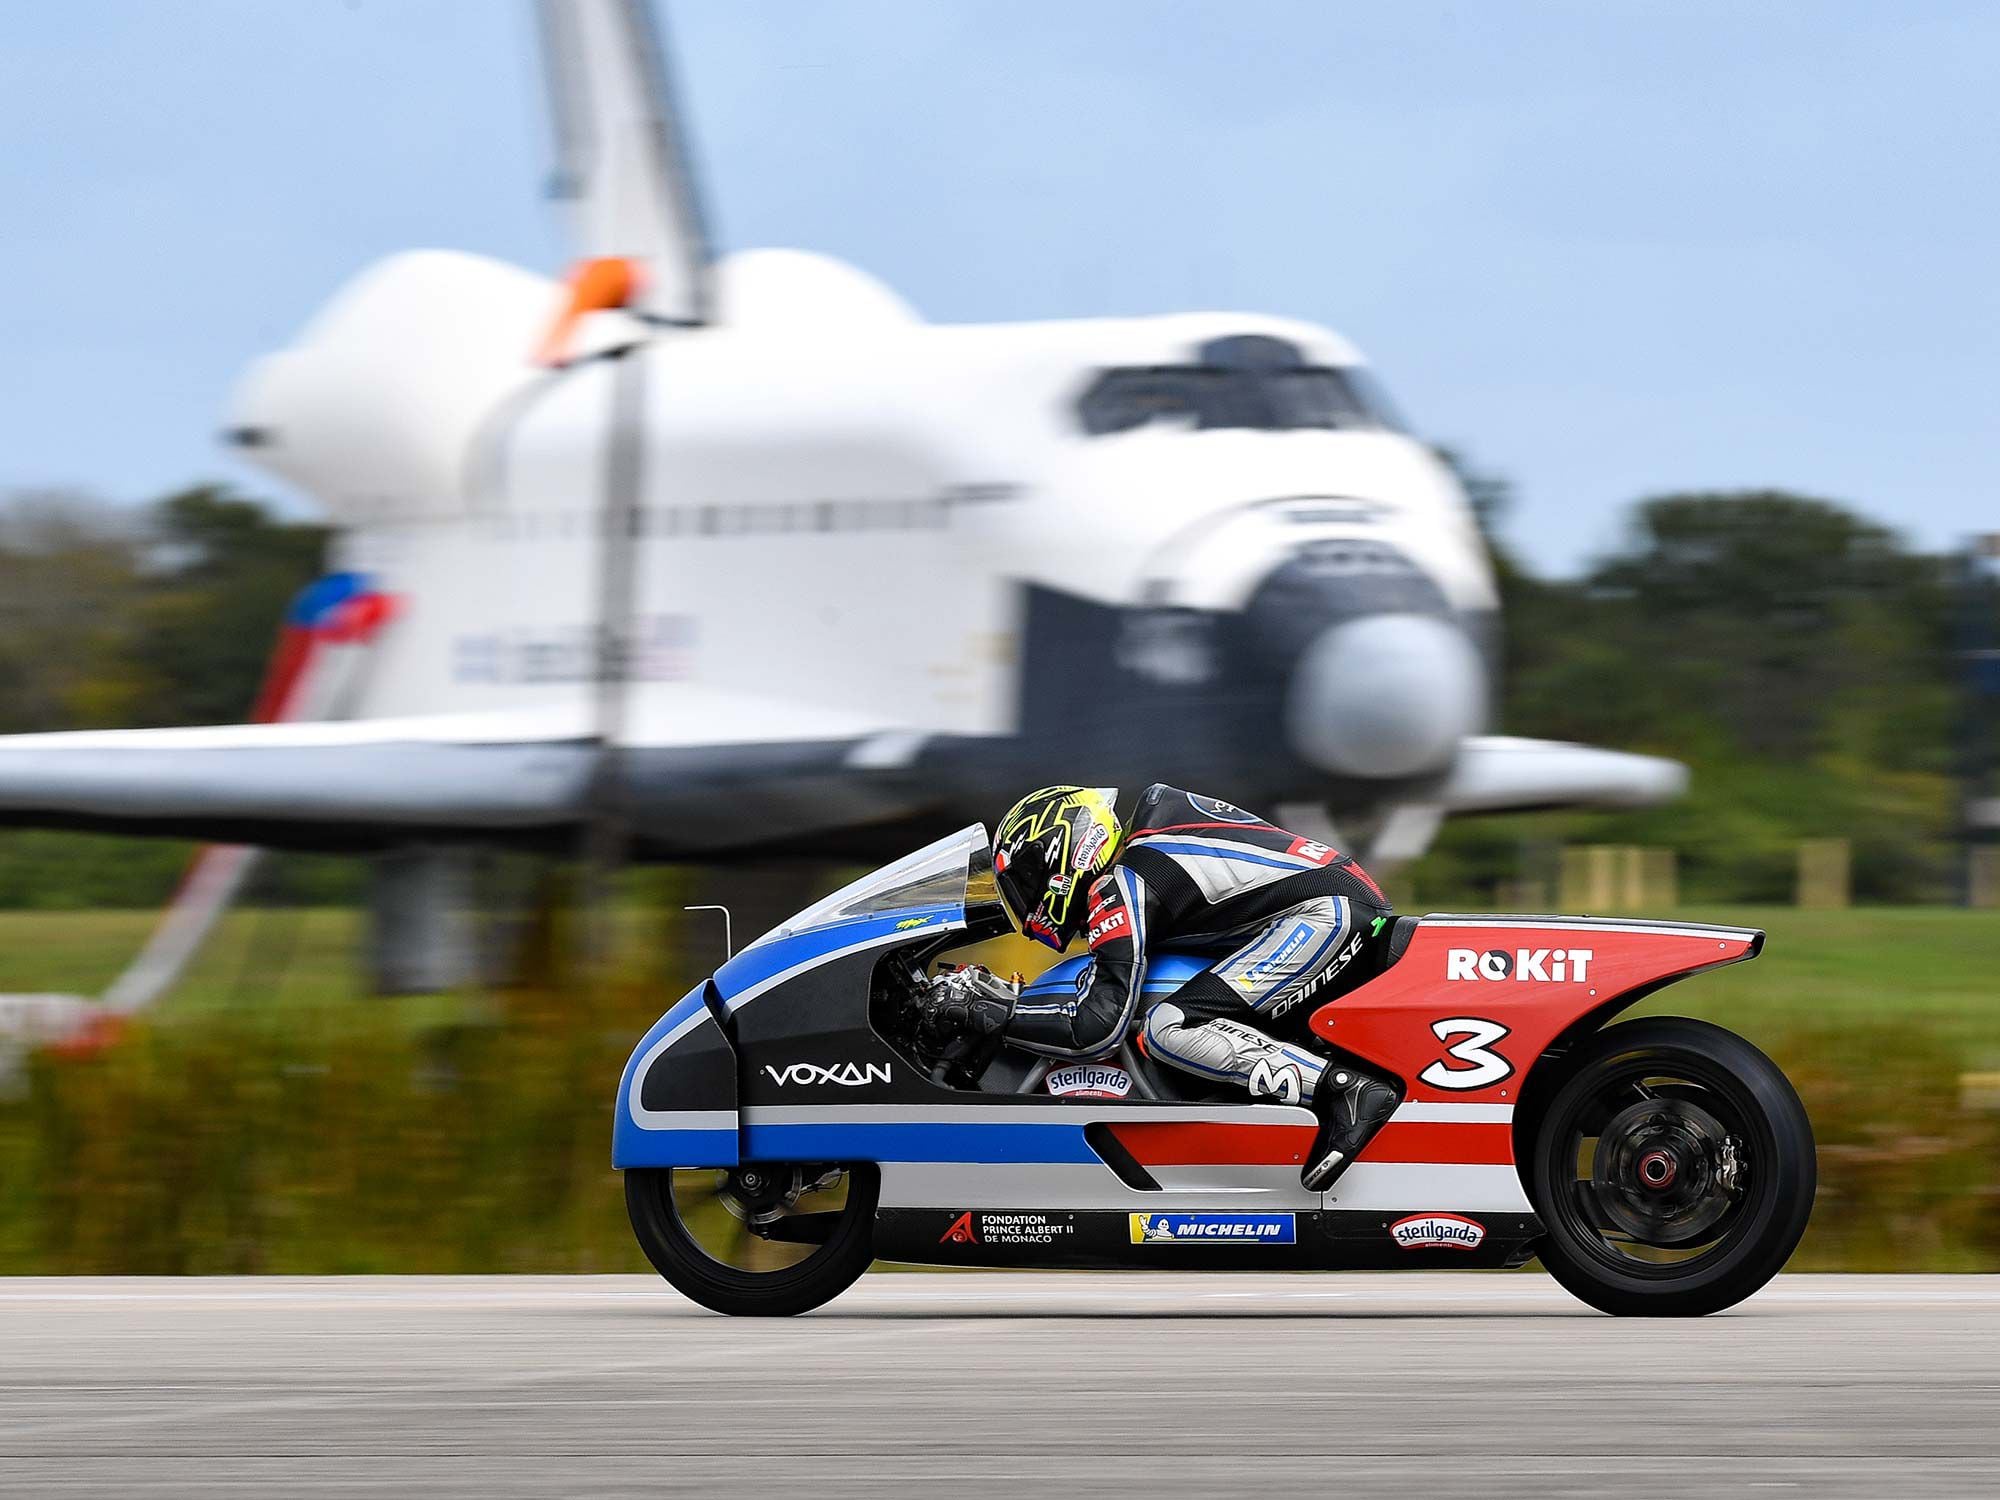 Max Biaggi achieved a new FIM world record on the Voxan Wattman at Space Florida Launch and Landing Facility.